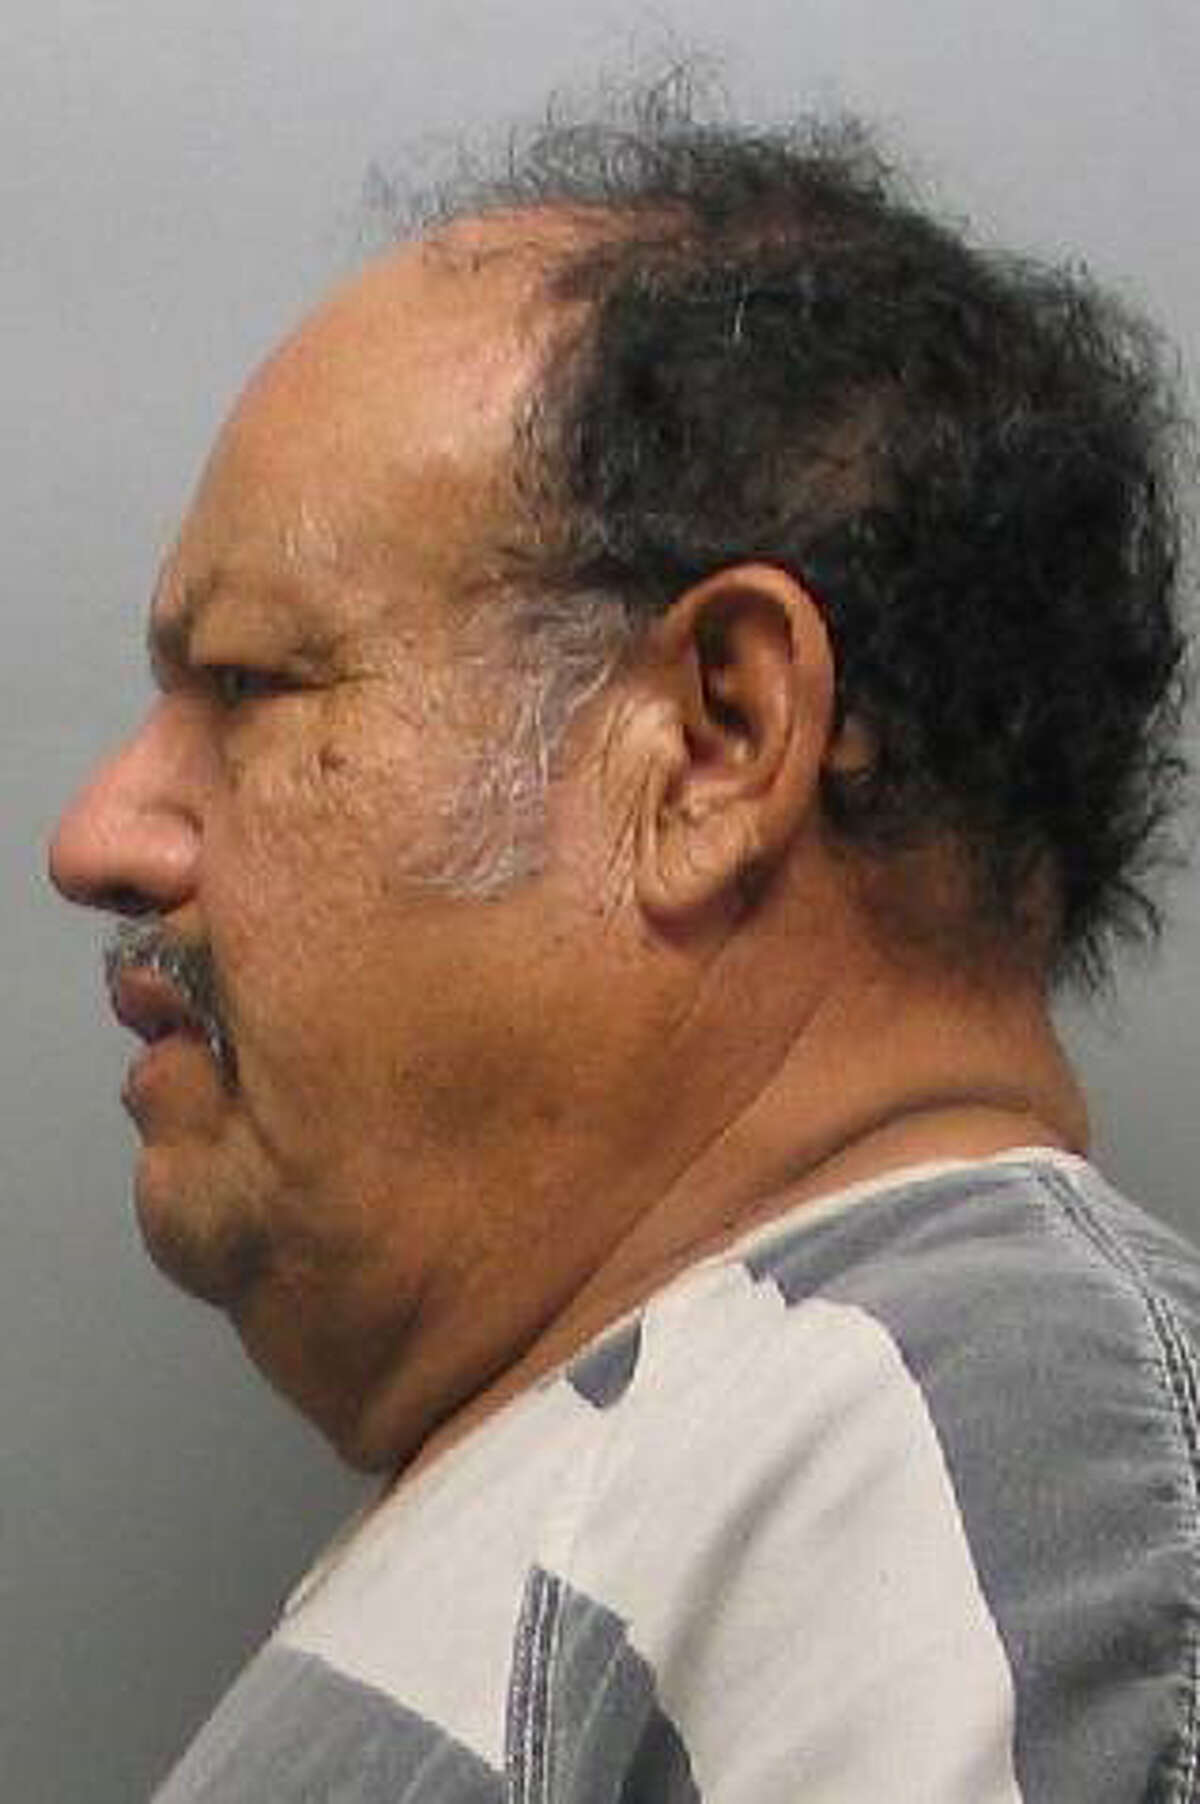 Rodolfo Dominguez Perez, 68, was arrested charged with a theft of property.